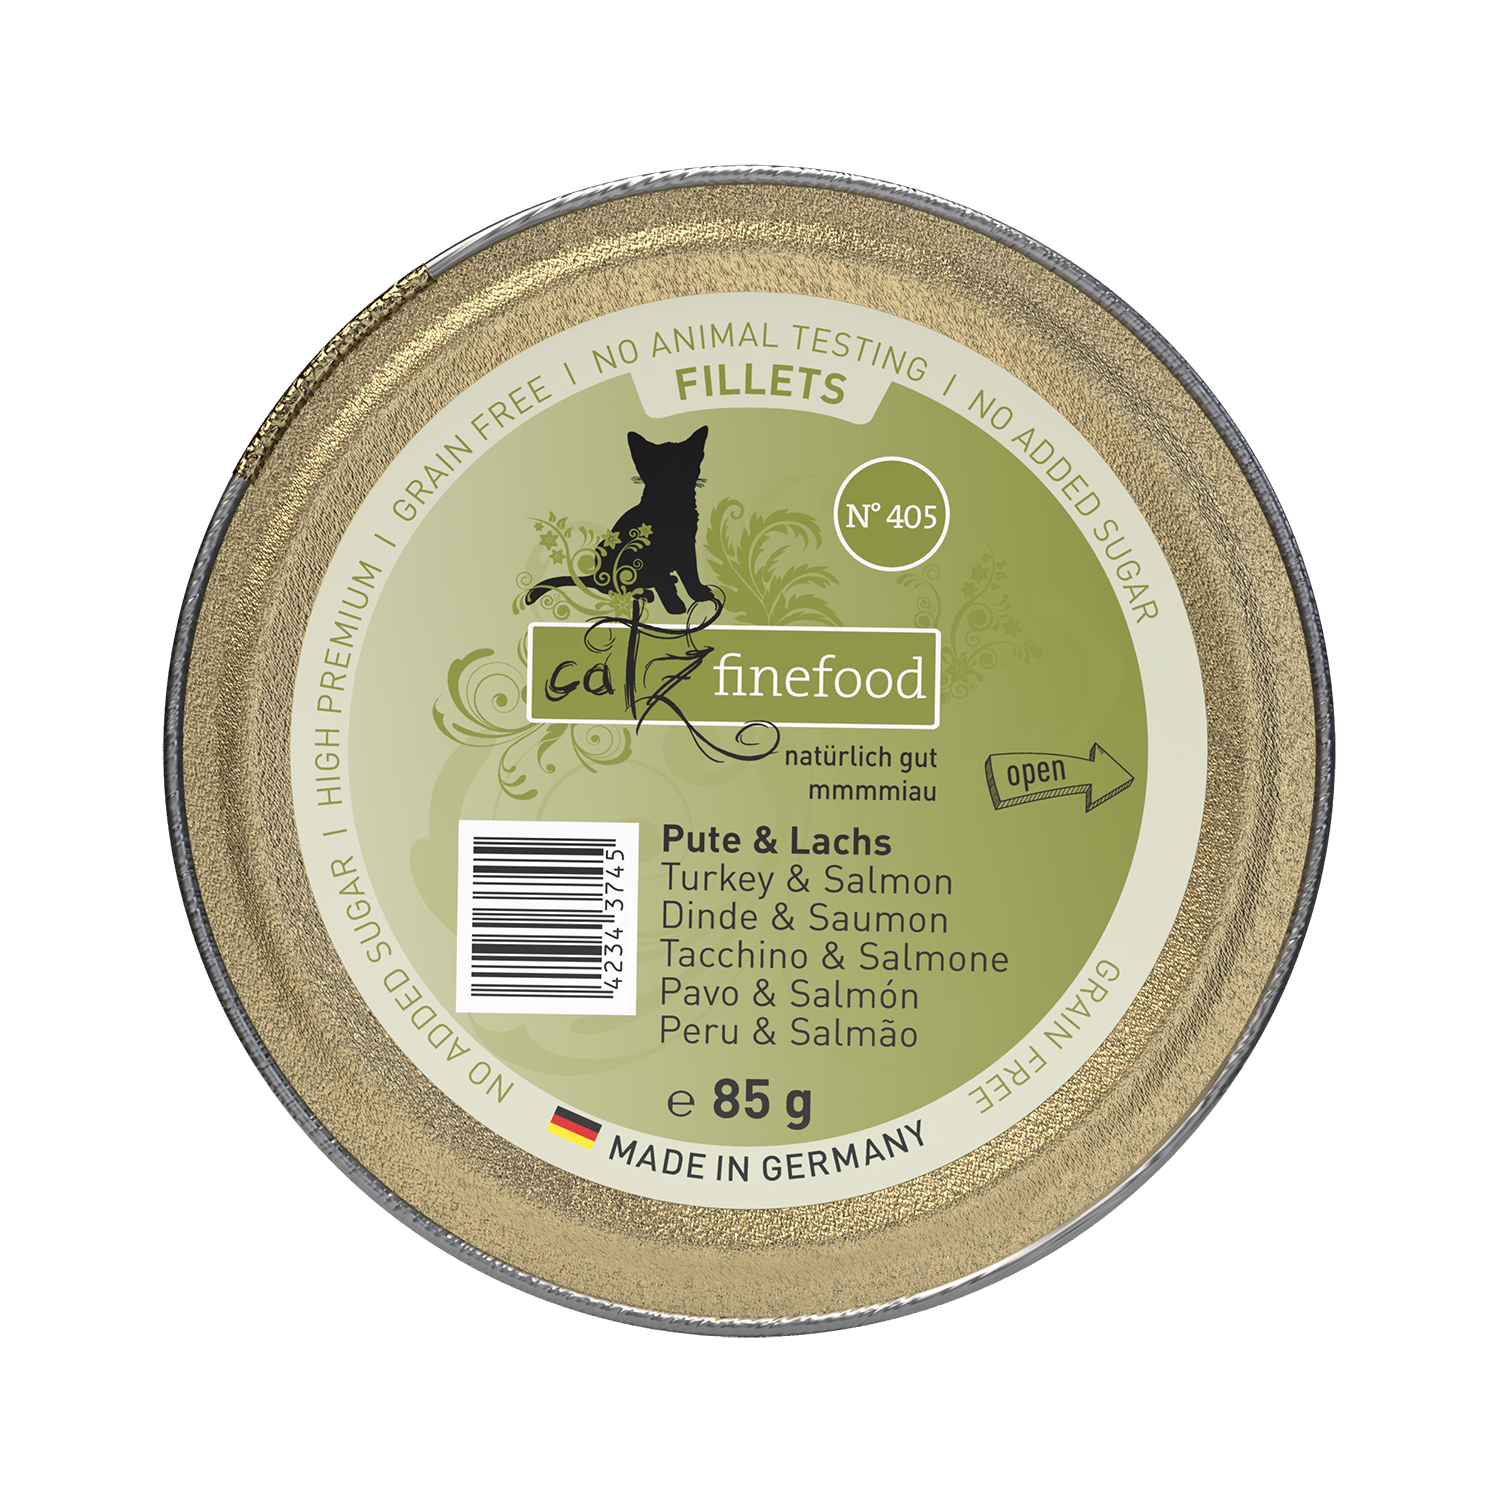 catz finefood Fillets N°405 - Pute, Huhn & Lachs in Jelly